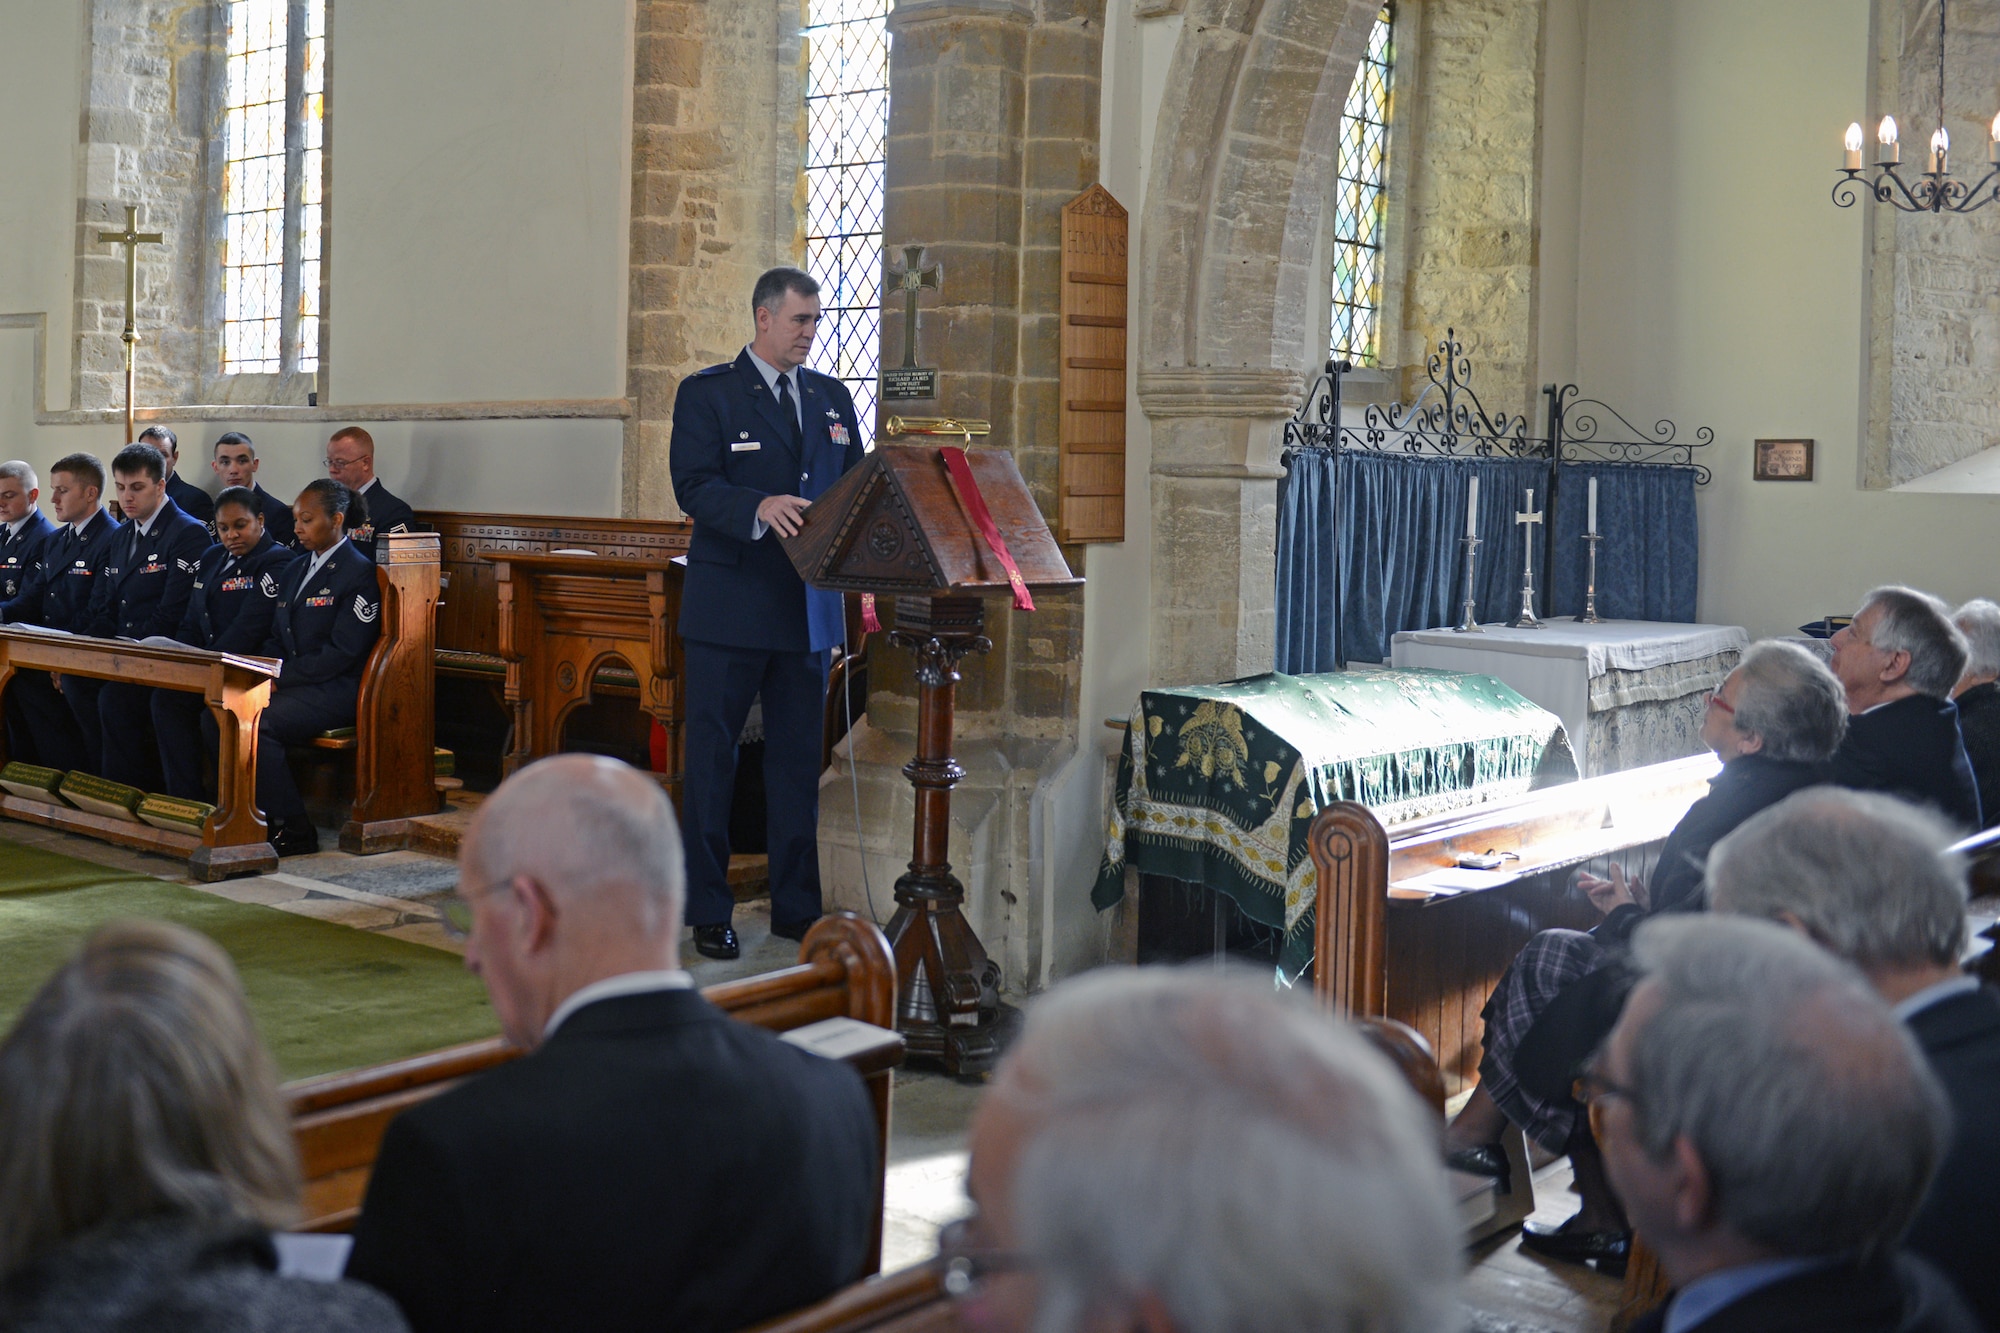 HELMDON, United Kingdom – Col. Charles Hamilton, 422nd Air Base Group commander, speaks during a memorial service for the crew of the Sharon Belle, who lost their lives in a crashed in at the Astwell Castle Farms in 1943. The village and 422nd Air Base Group held a ceremony in honor of the 327th Bombardment Squadron, VIII Bomber Command, Airmen killed Nov. 30, 1943, when they left RAF Poddington on a bombing mission to Germany, and their plane crashed at Astwell Castle Farms. (U.S. Air Force photo by Tech. Sgt. Chrissy Best)